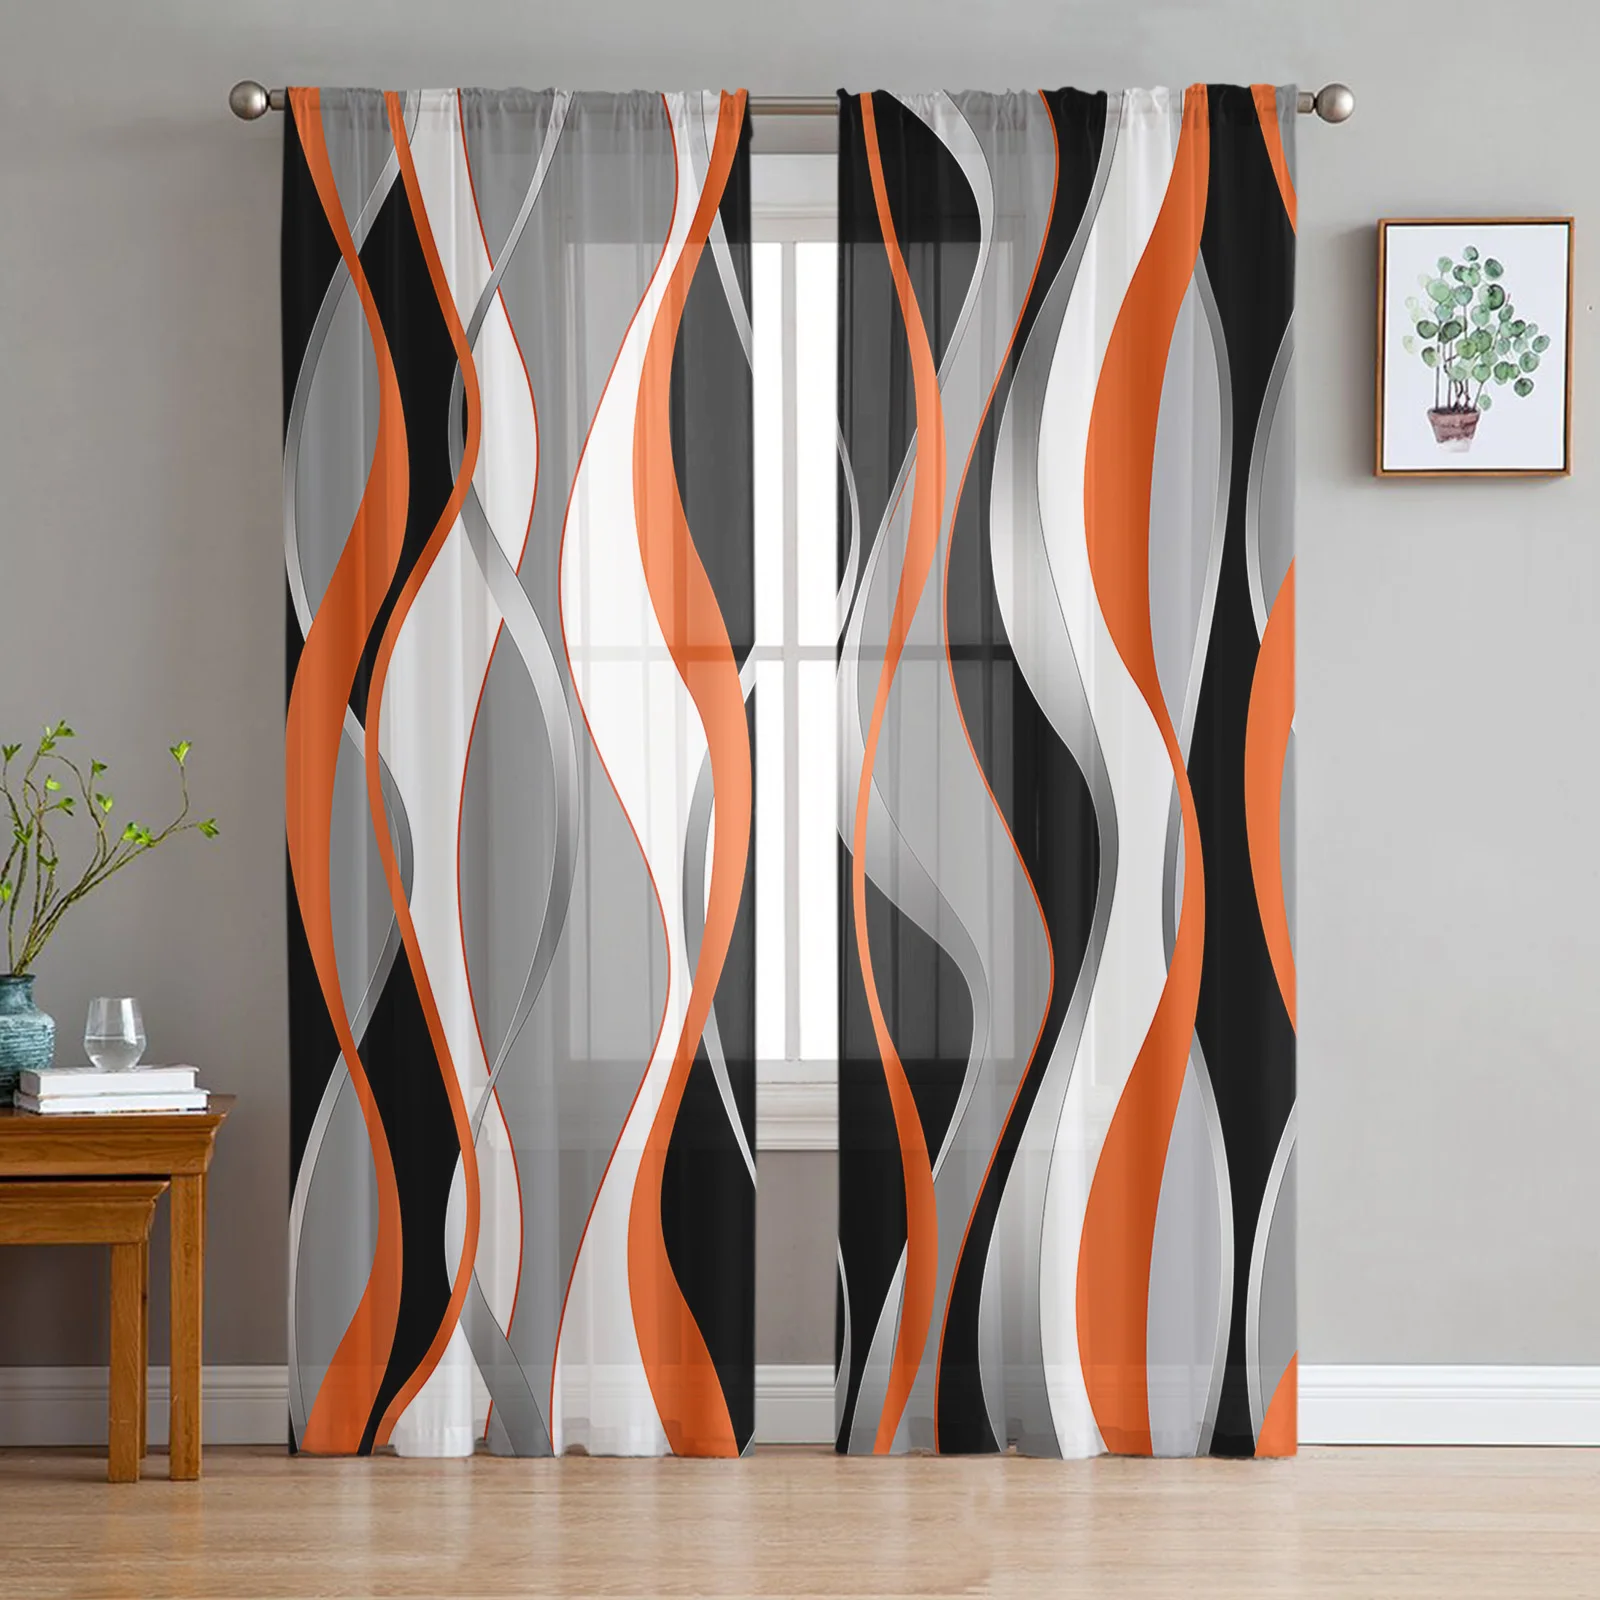 

Abstract Lines Orange Tulle Curtains for Living Room Geometric Sheer Voile Curtain for Bedroom Kitchen Window Drapes Blinds